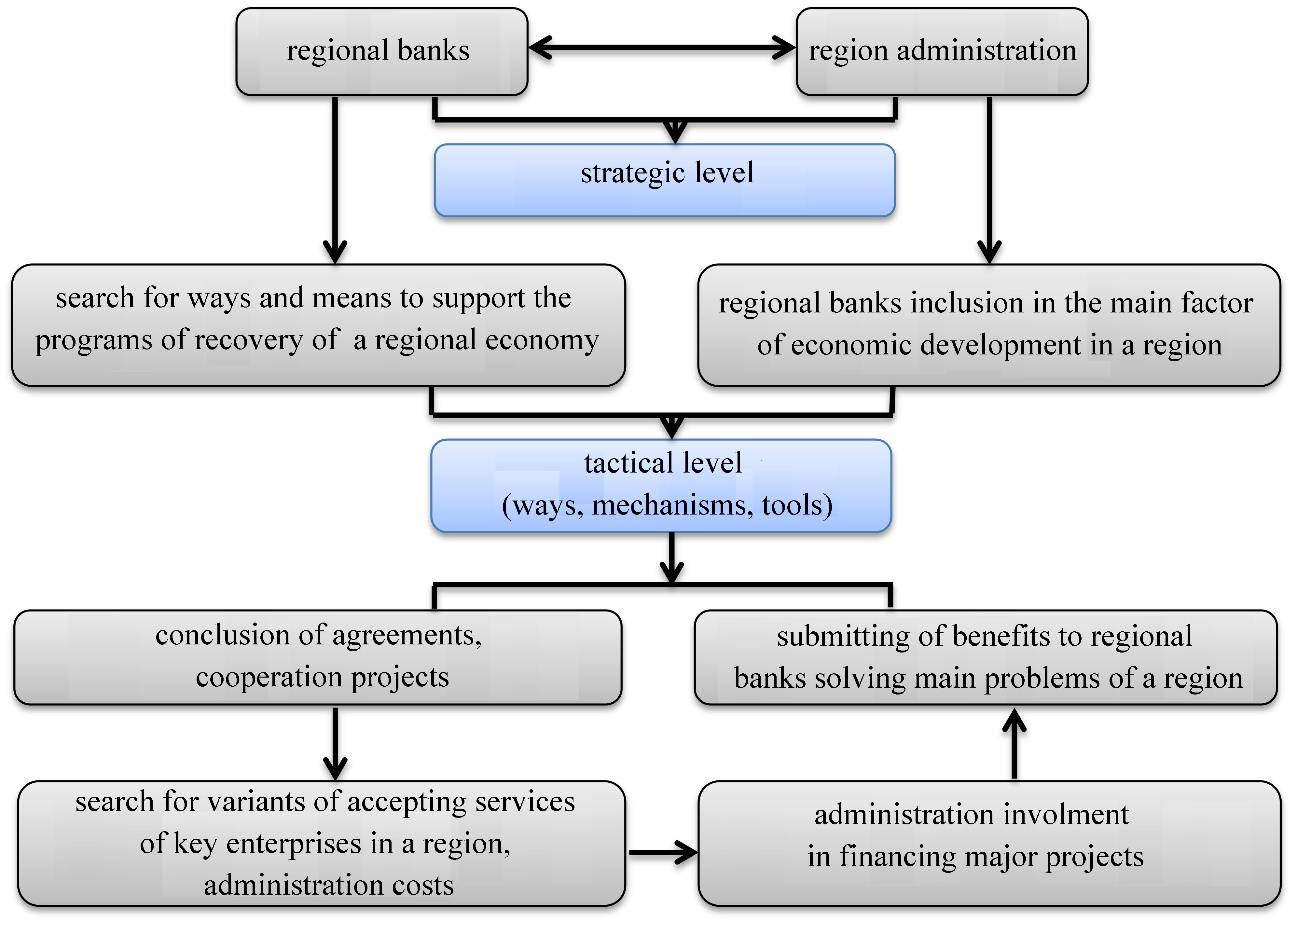 Opportunities for interaction between executive authorities and regional banks